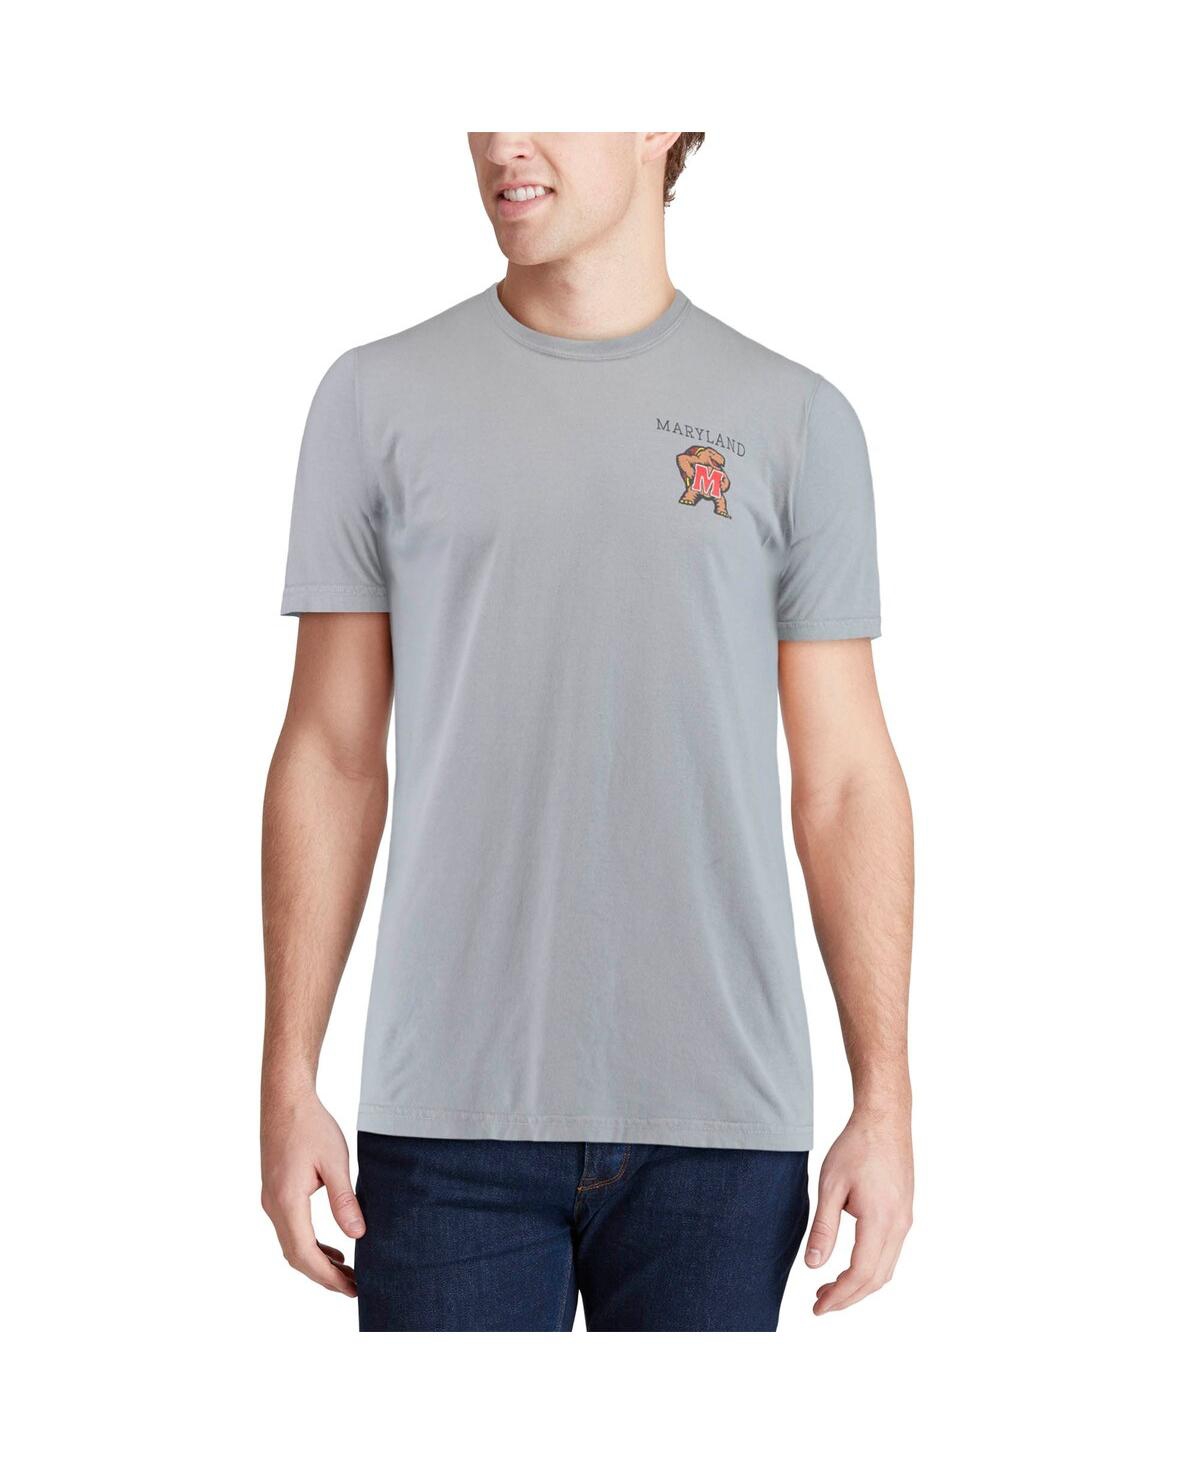 Shop Image One Men's Gray Maryland Terrapins Team Comfort Colors Campus Scenery T-shirt